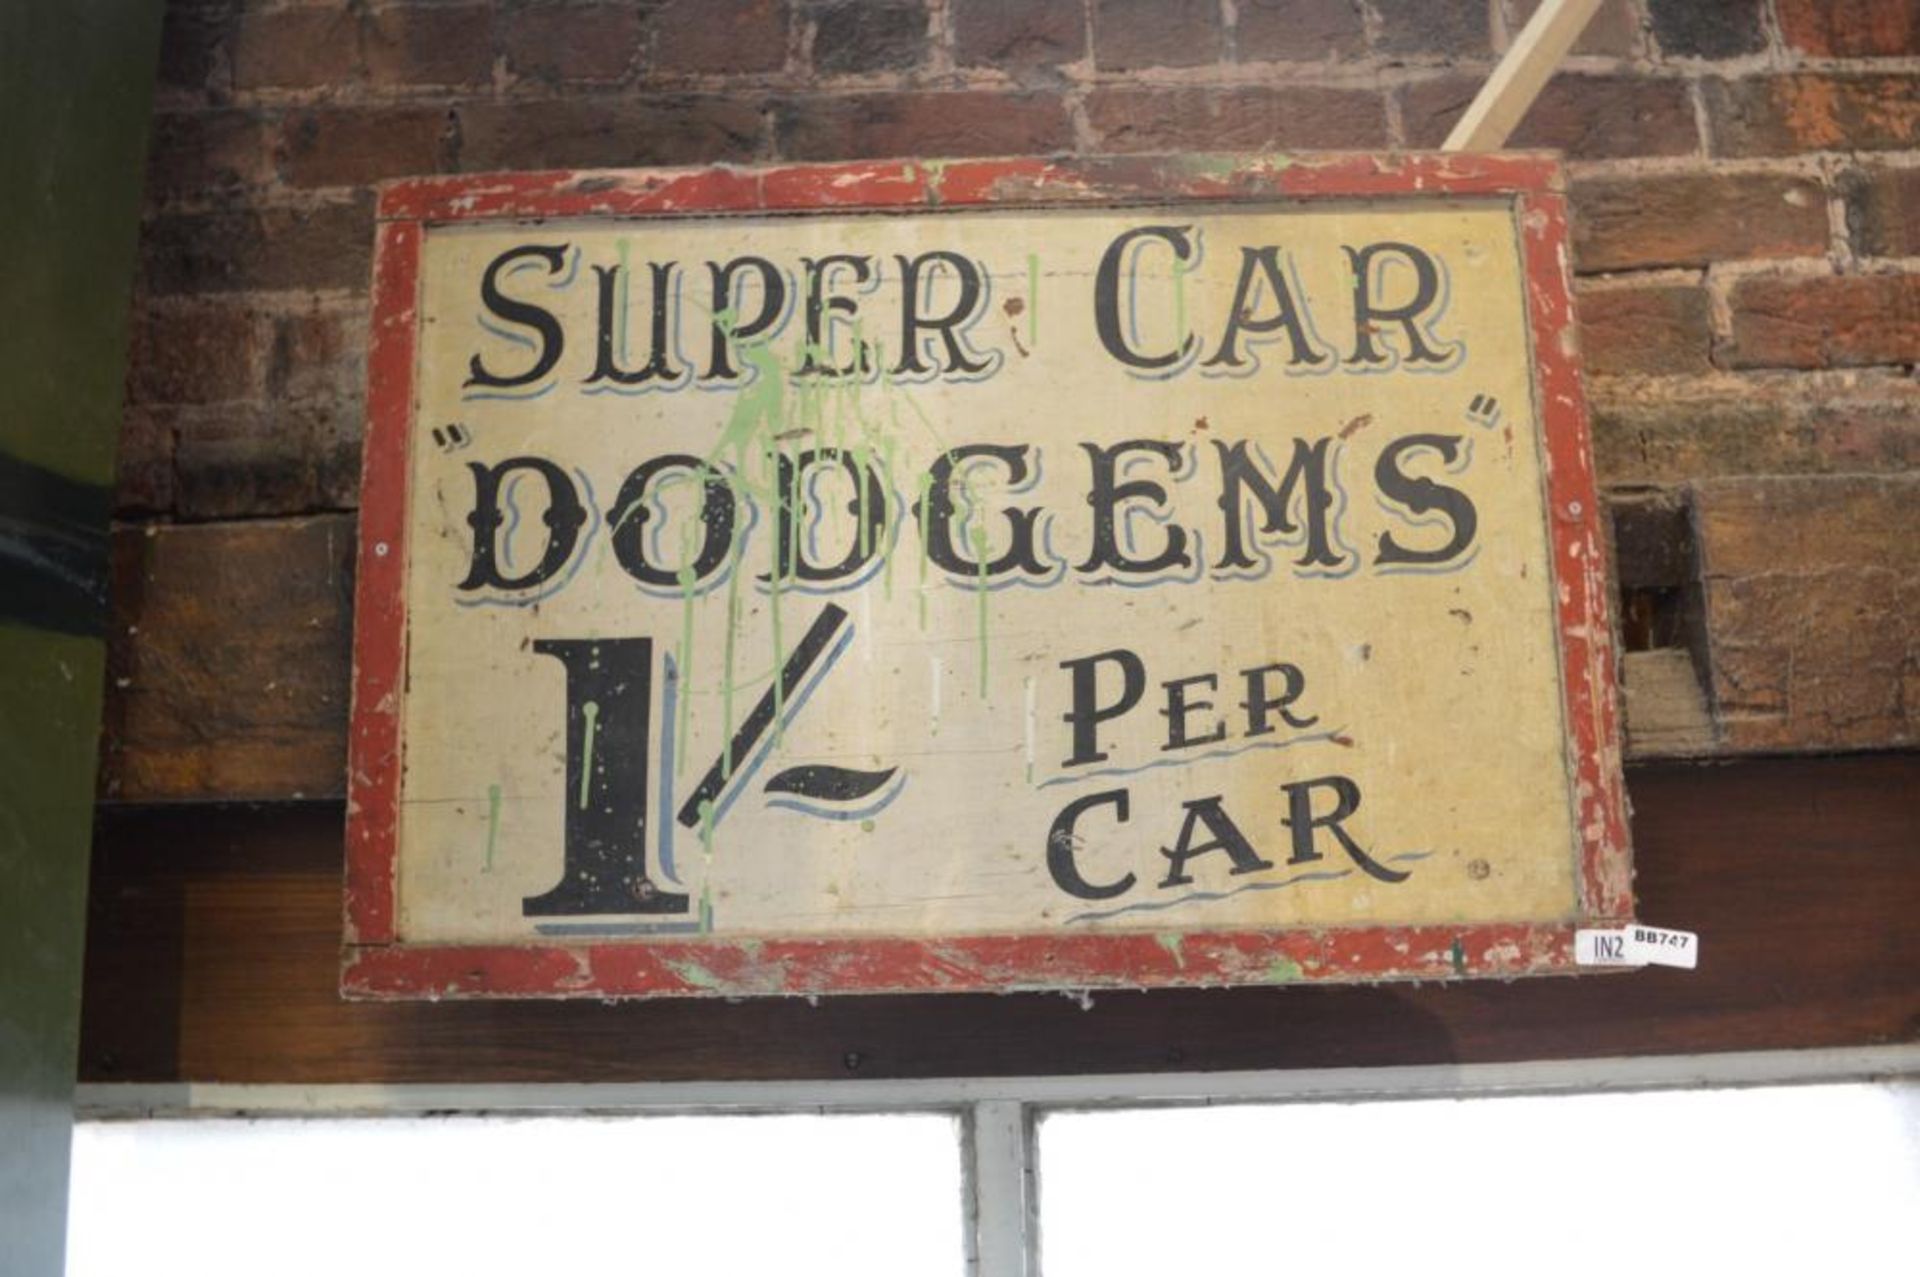 1 x Vintage Hand Painted "Super Car Dodgems 1 Shilling Per Car" Sign - 34 x 23 Inches - Ref BB747 - - Image 2 of 5